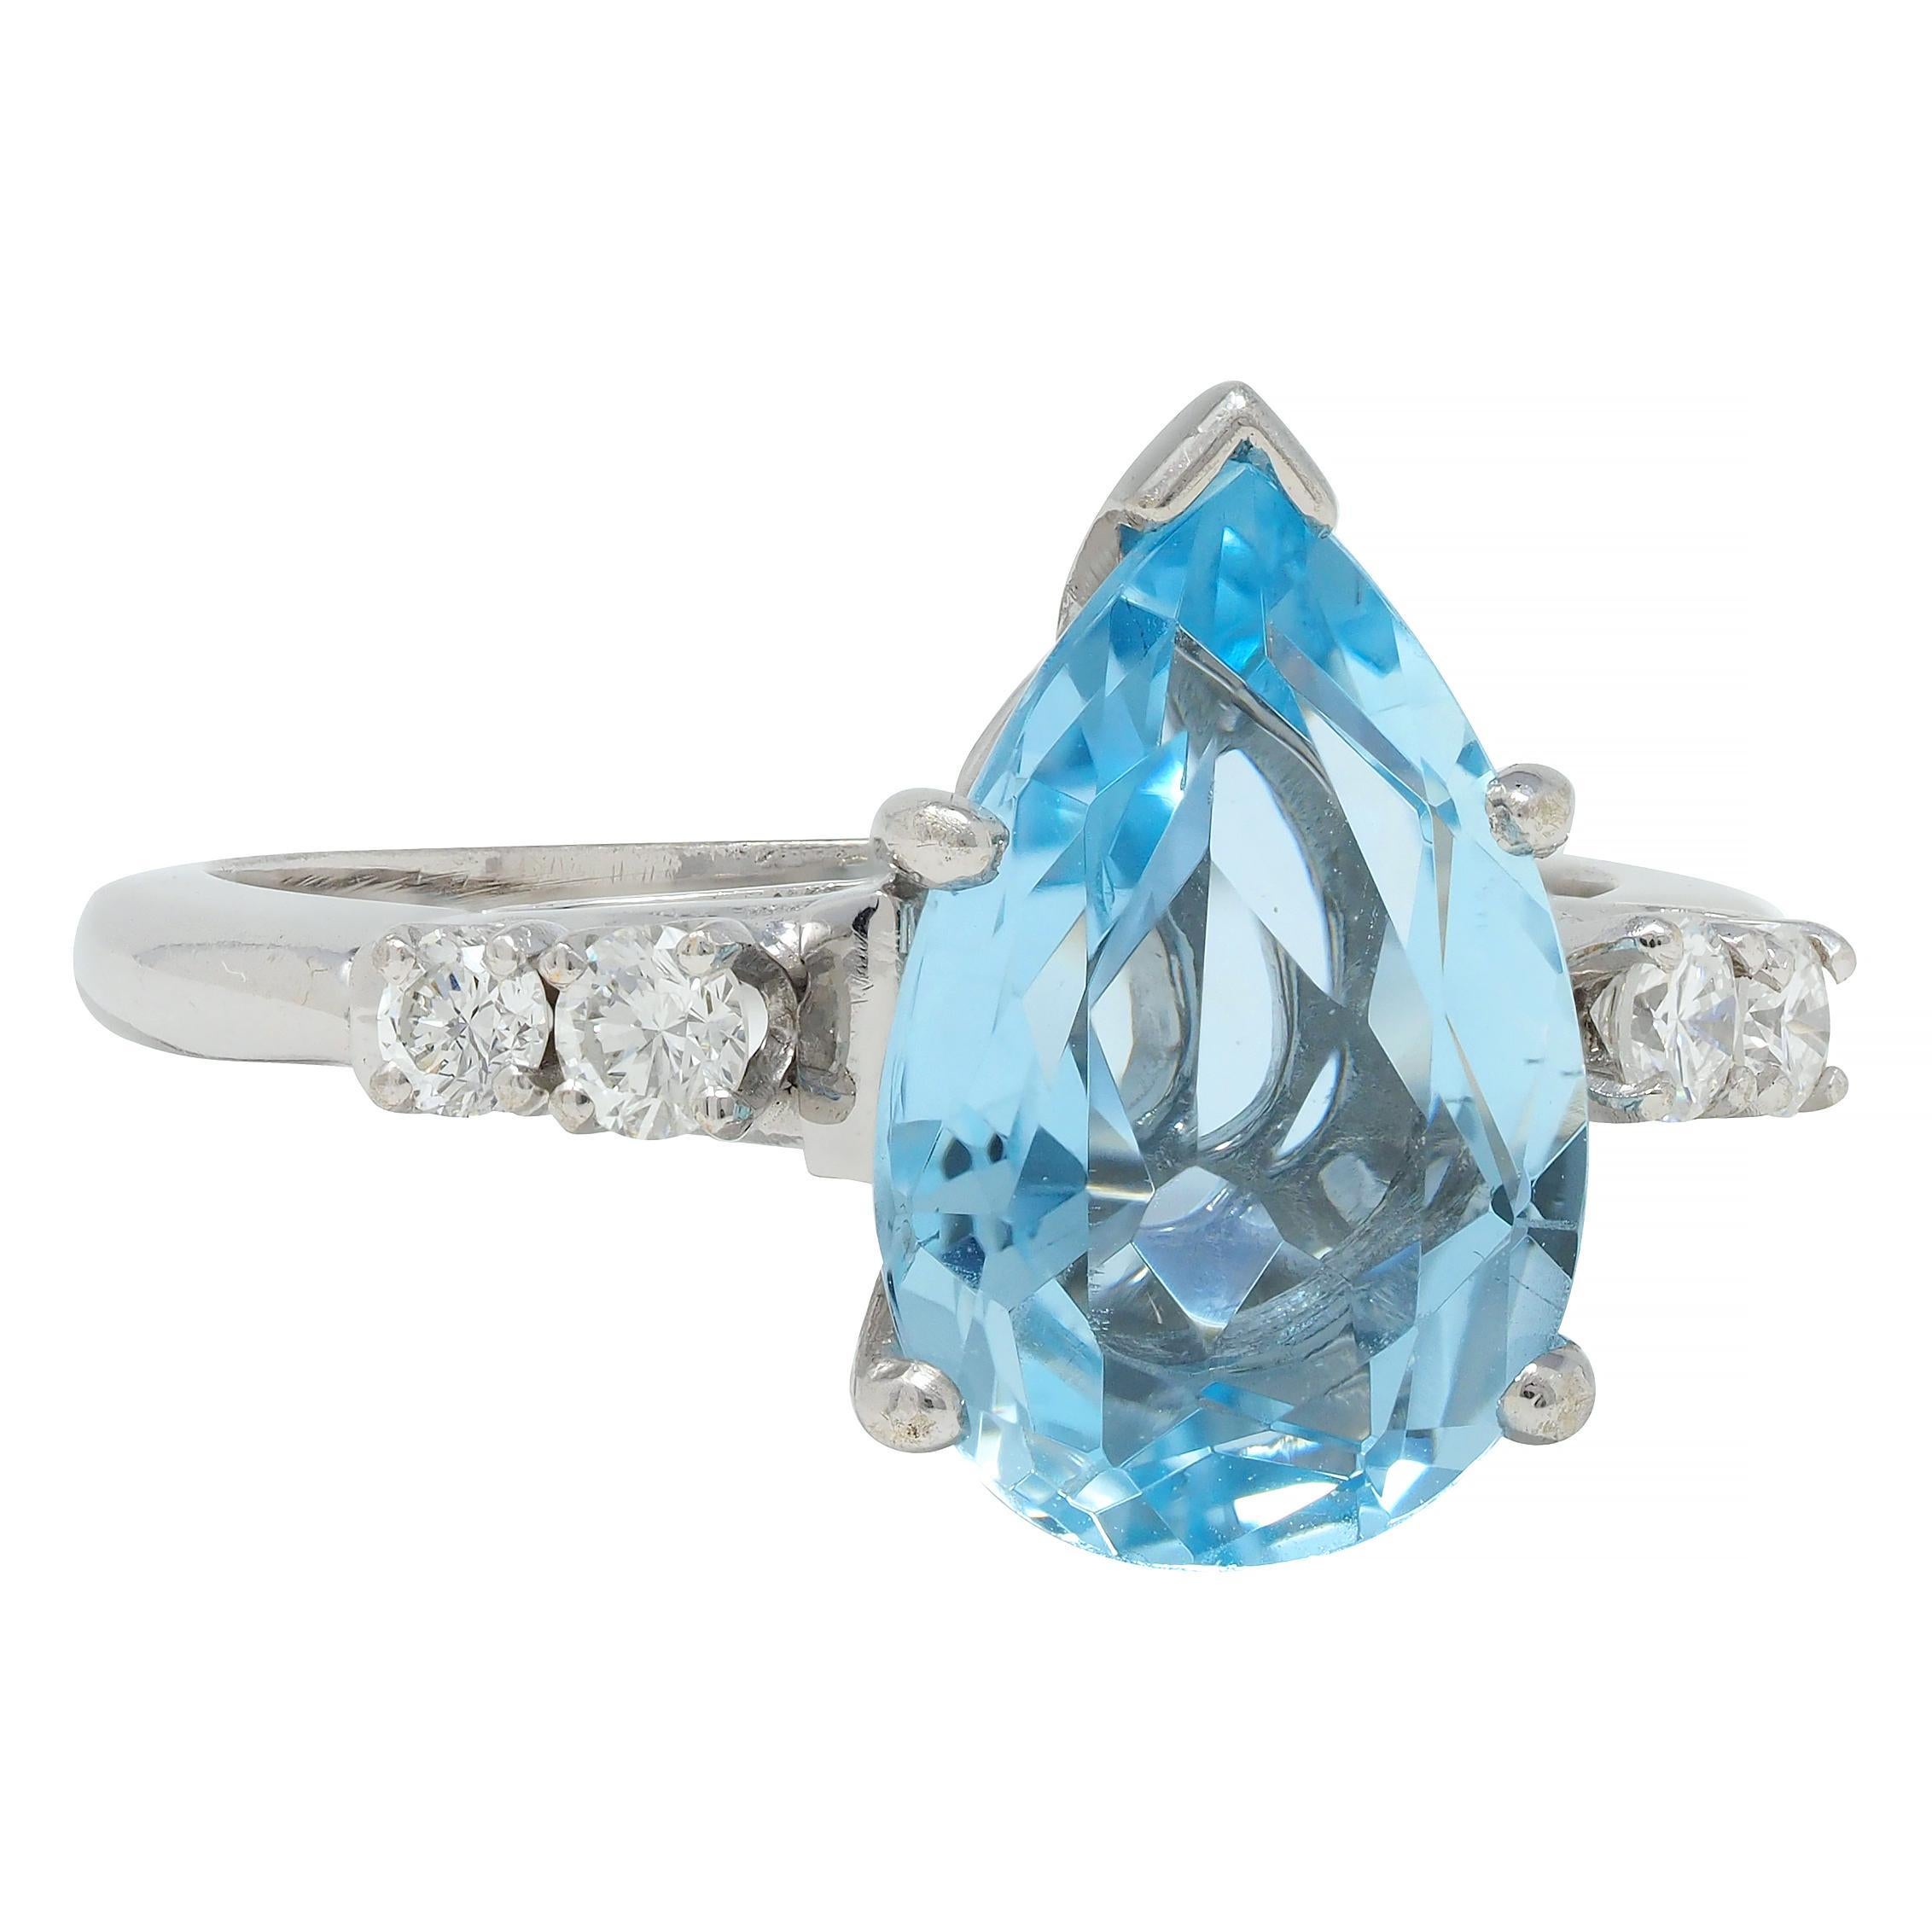 Contemporary 2.24 CTW Pear Cut Aquamarine Diamond 14 Karat White Gold Ring In Excellent Condition For Sale In Philadelphia, PA